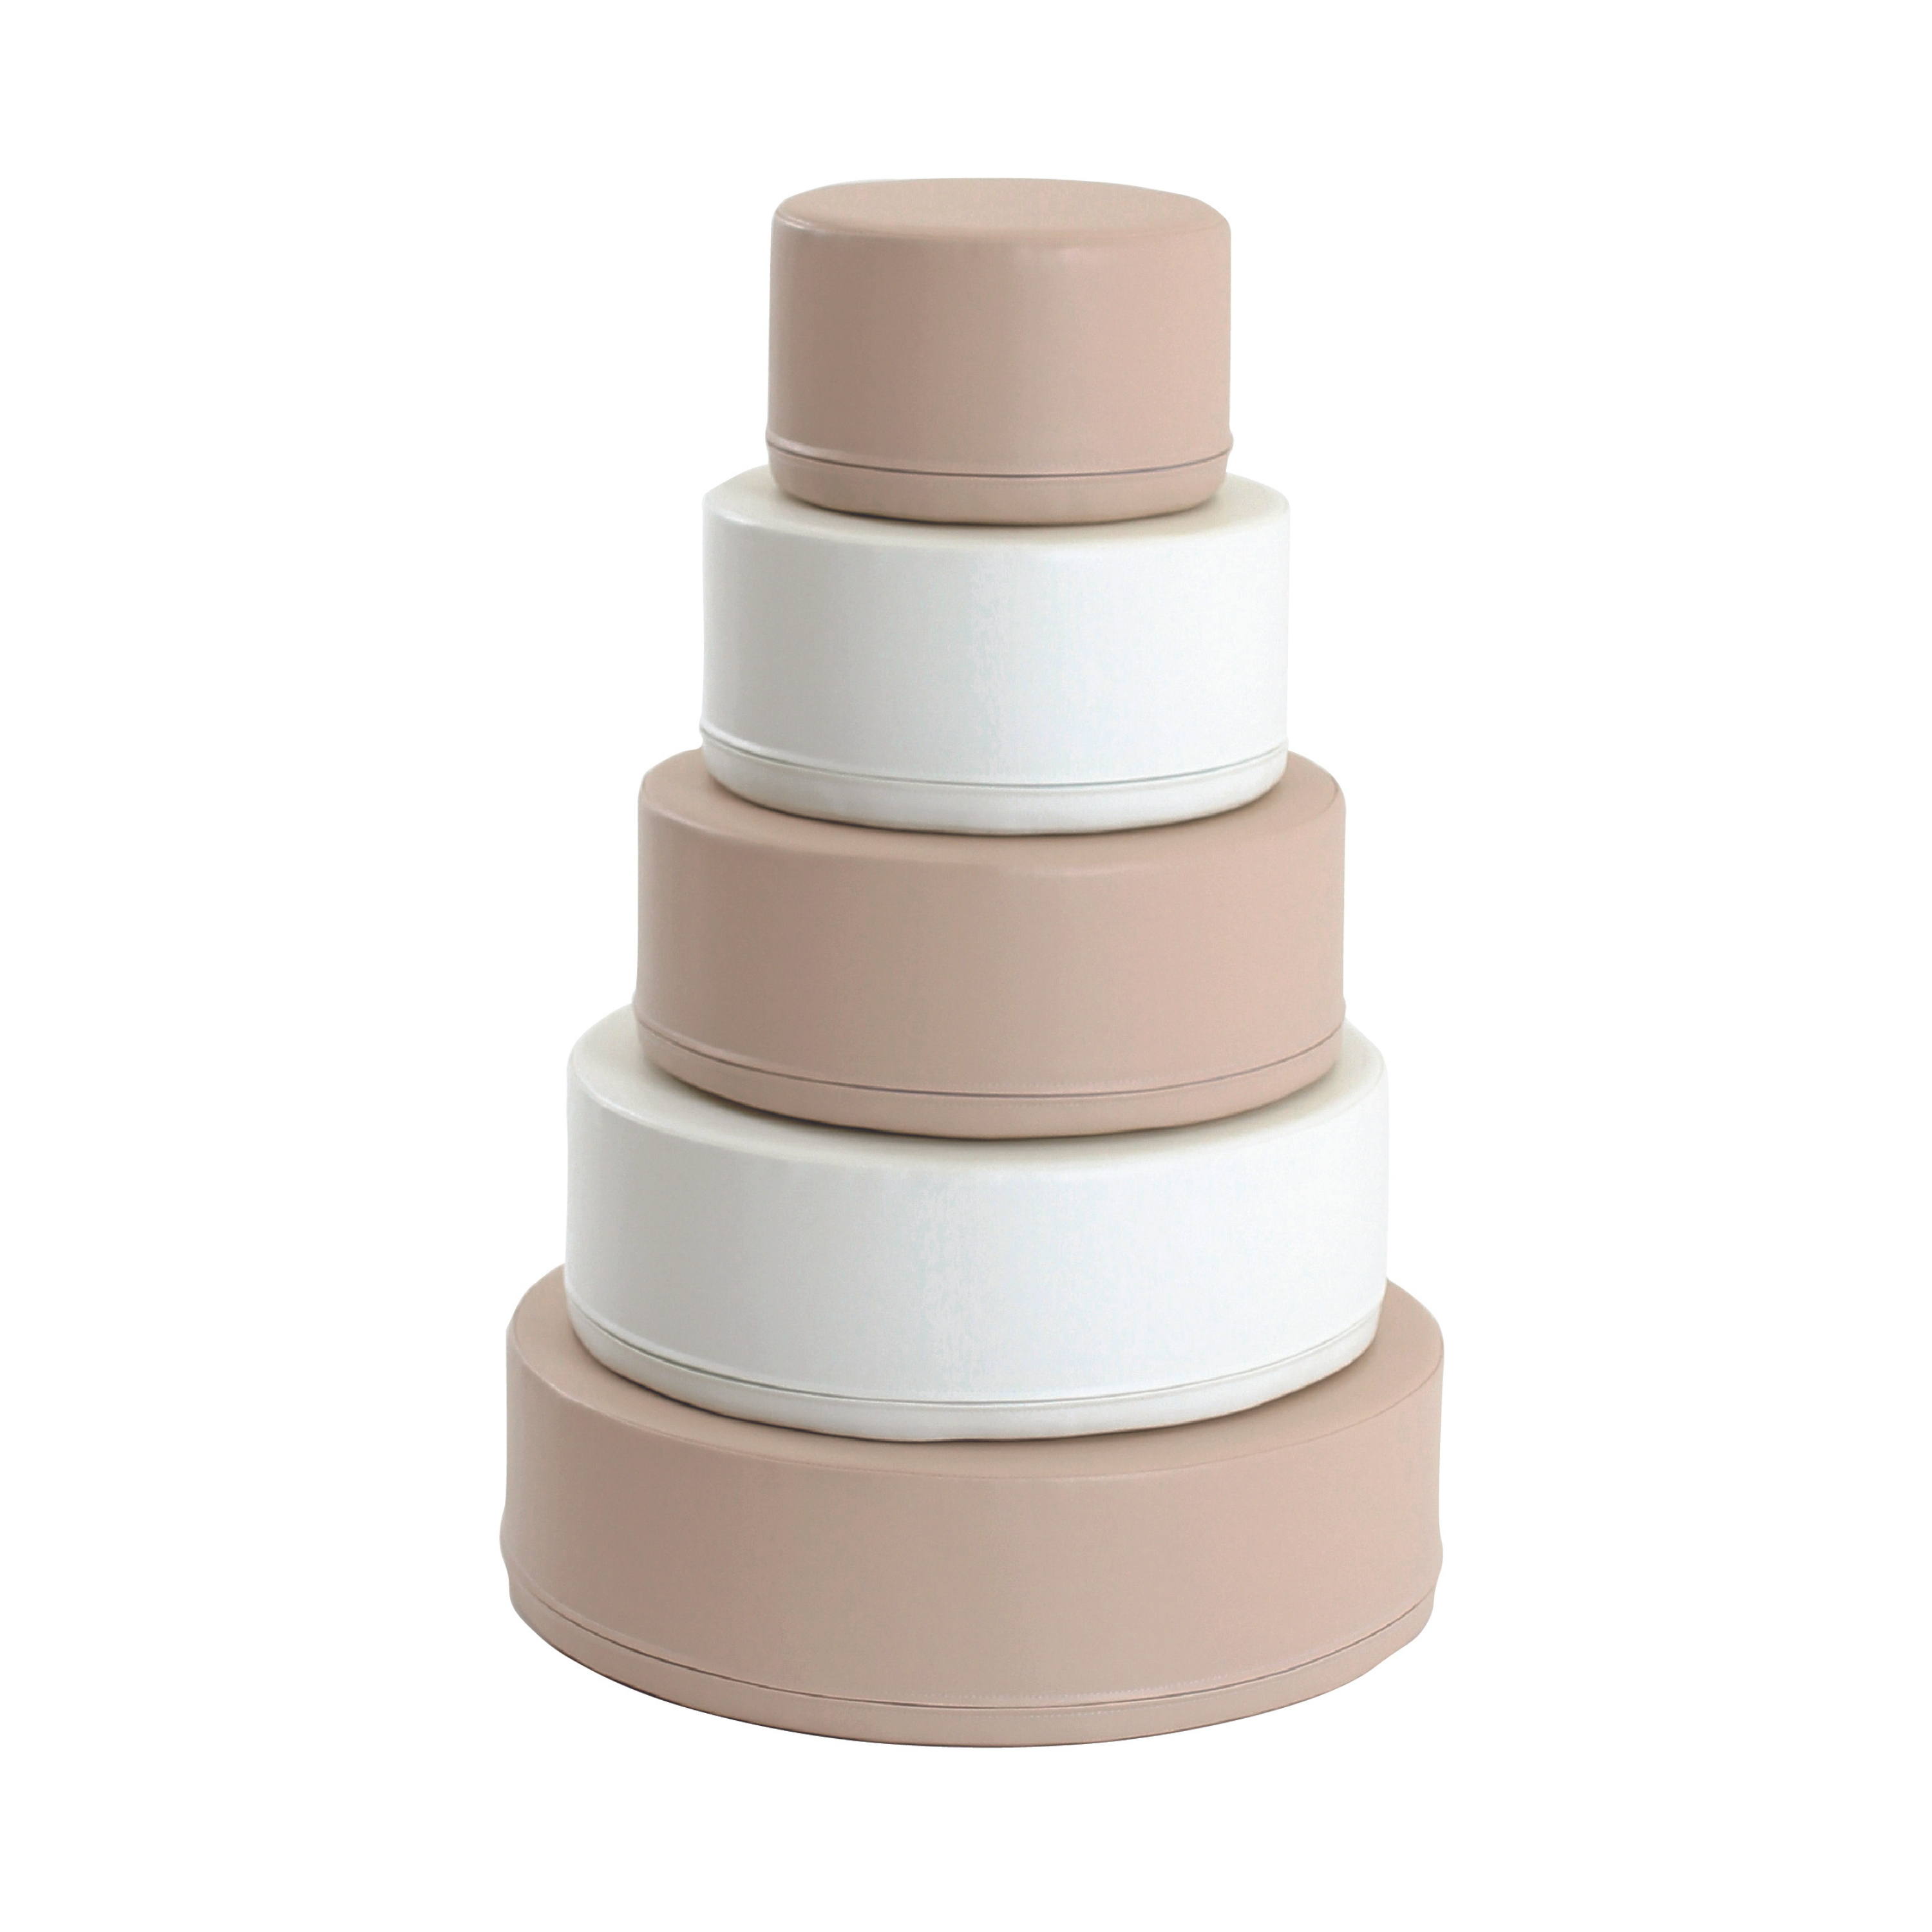 A stack of beige and white round soft blocks